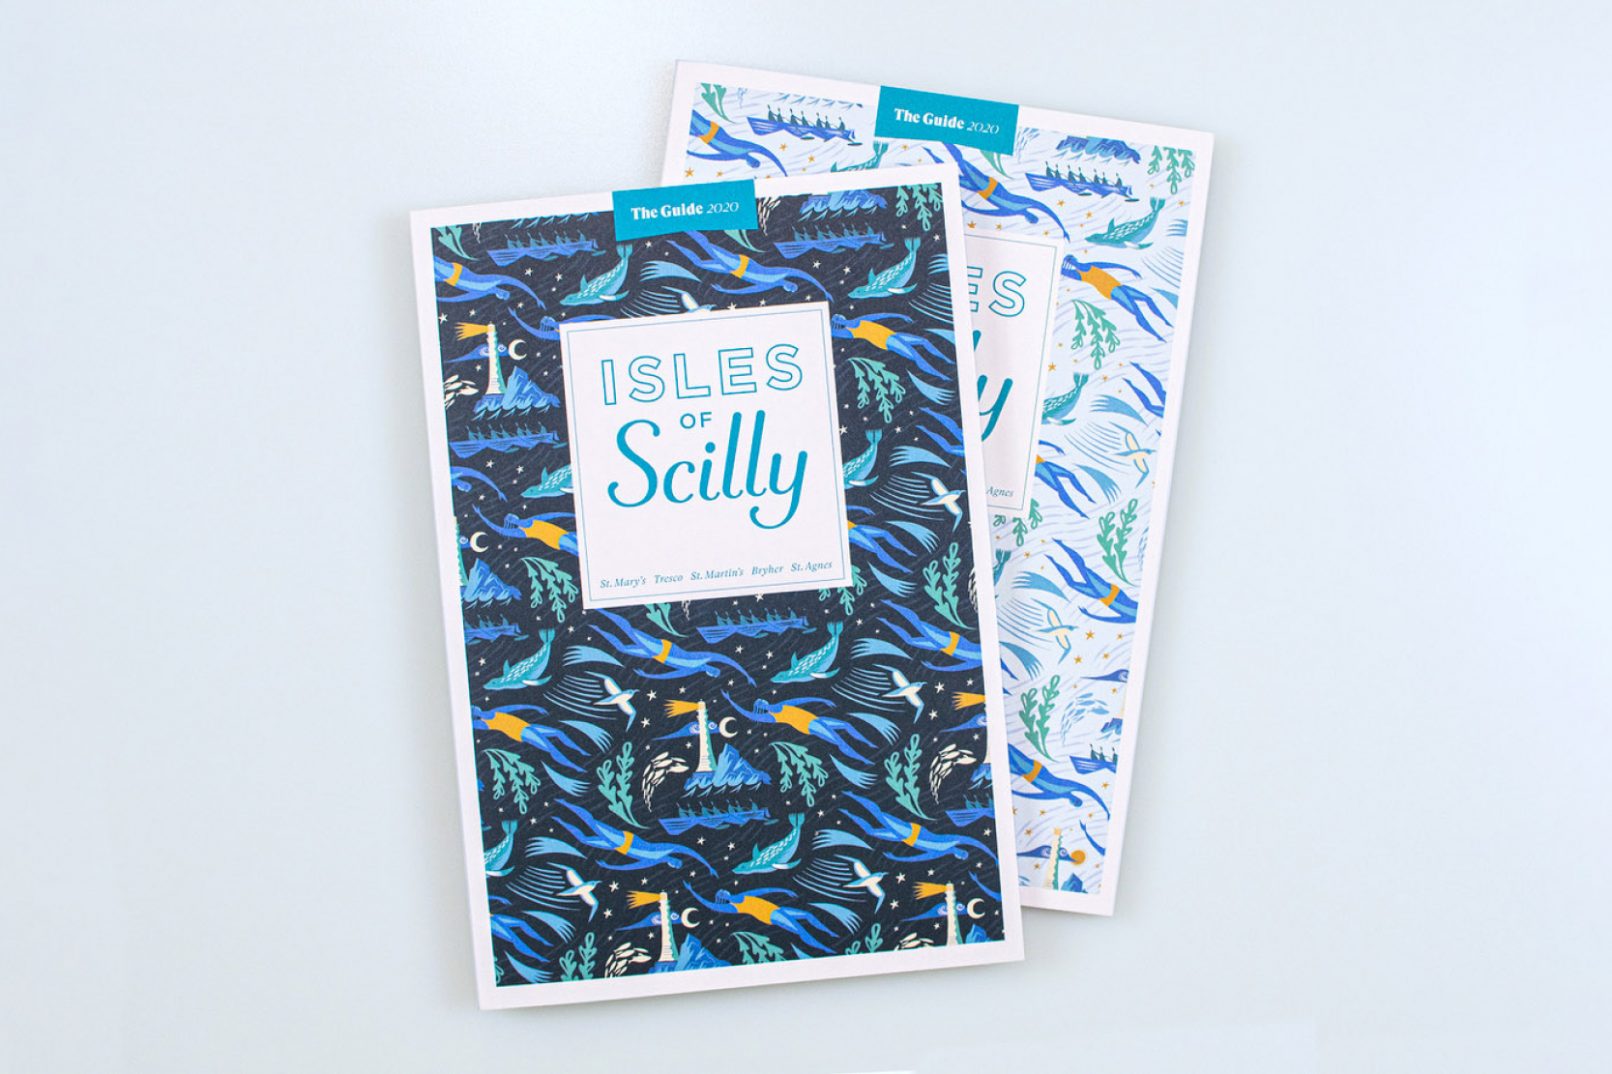 Feature image showing Isles Of Scilly Guide illustrated cover design by Jan Thompson and Nick Hayes